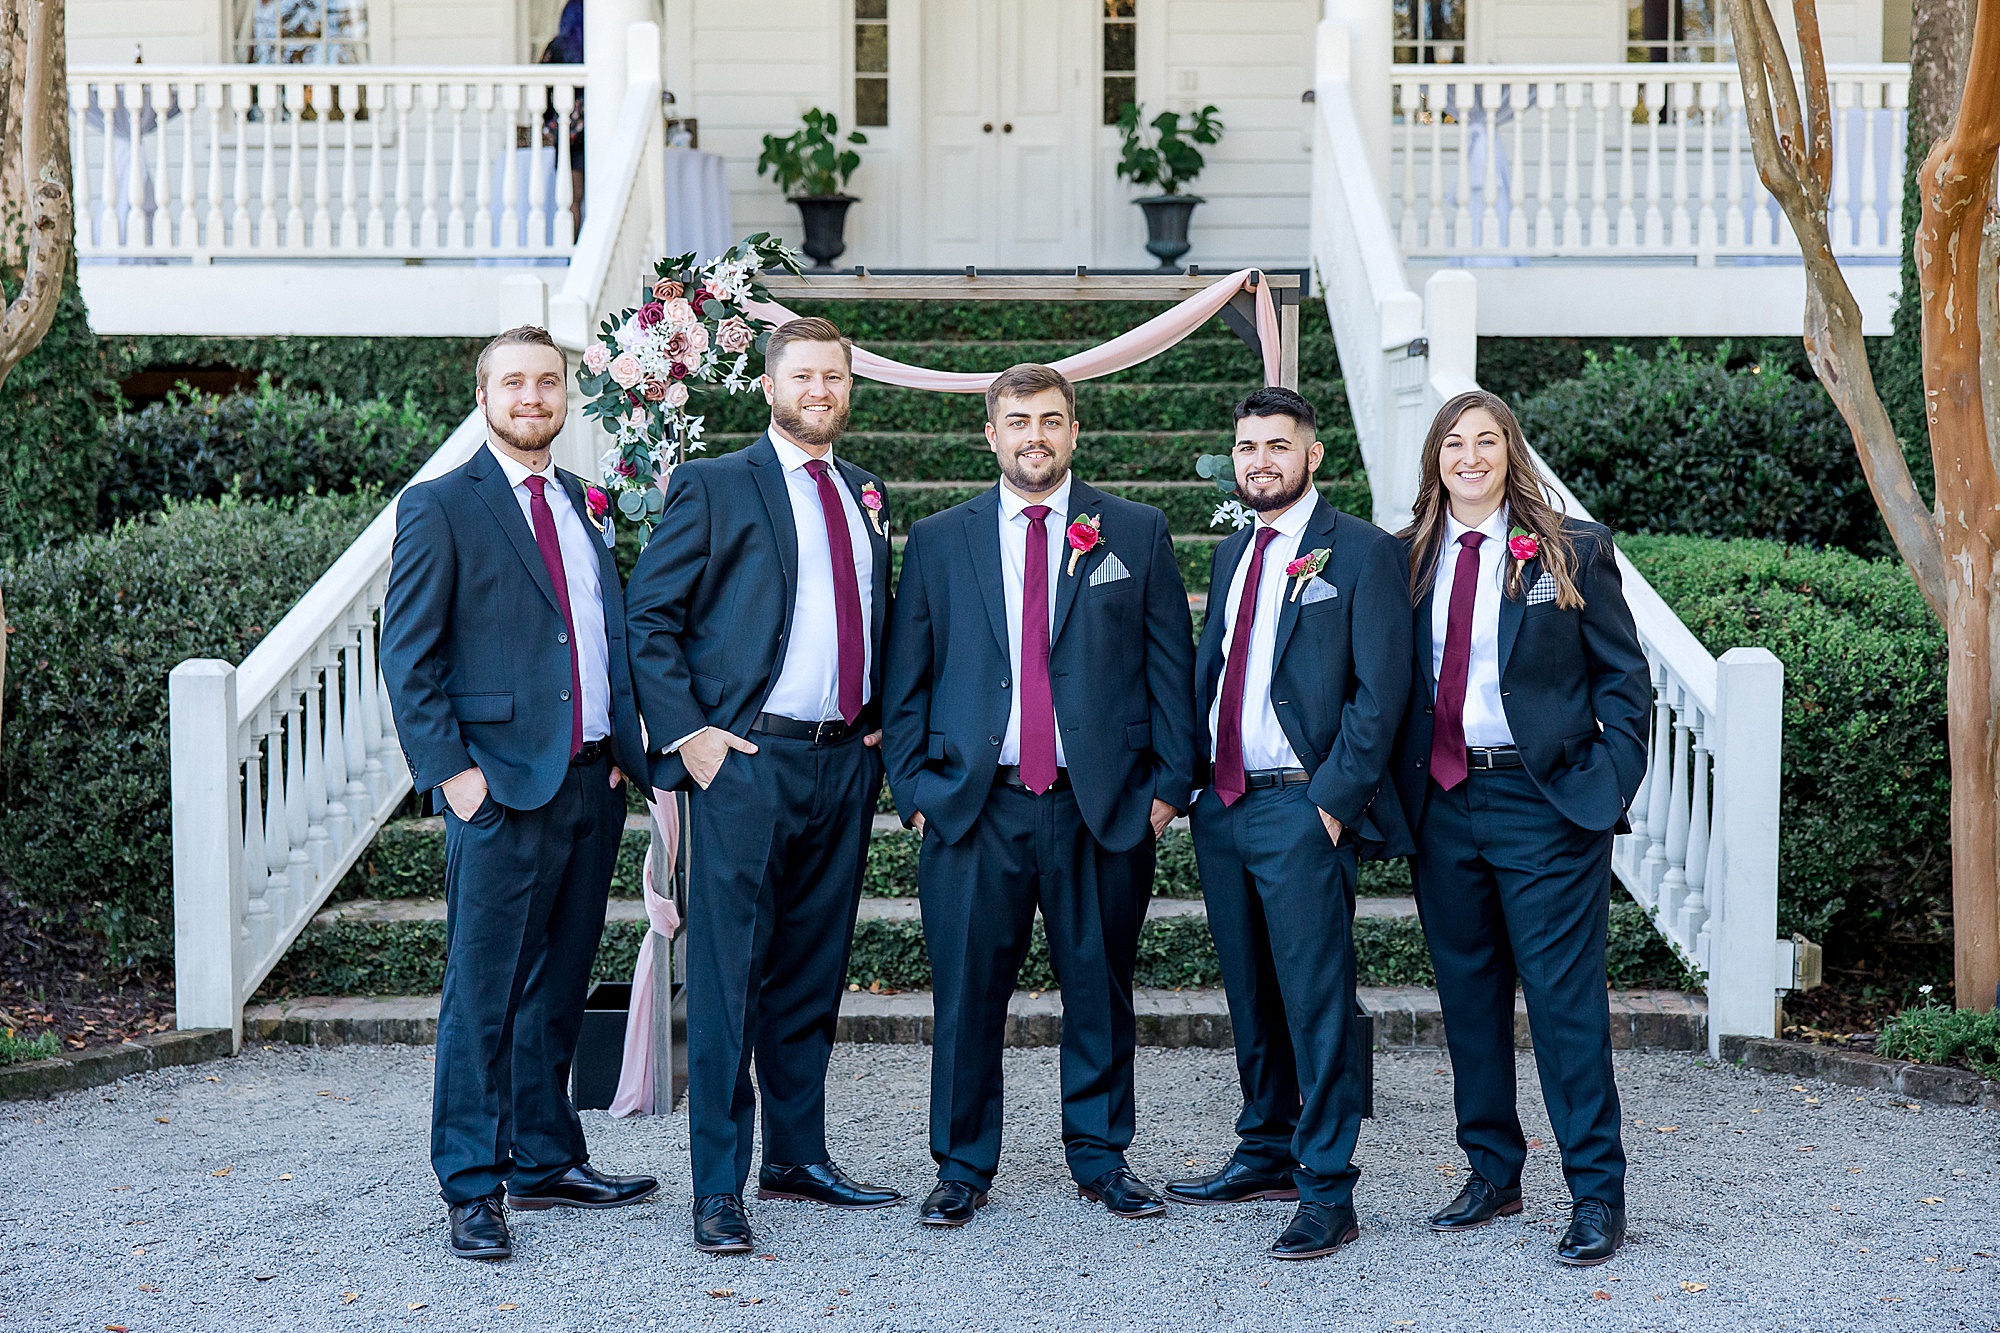 Groom and Groomsmen stand together before wedding ceremony